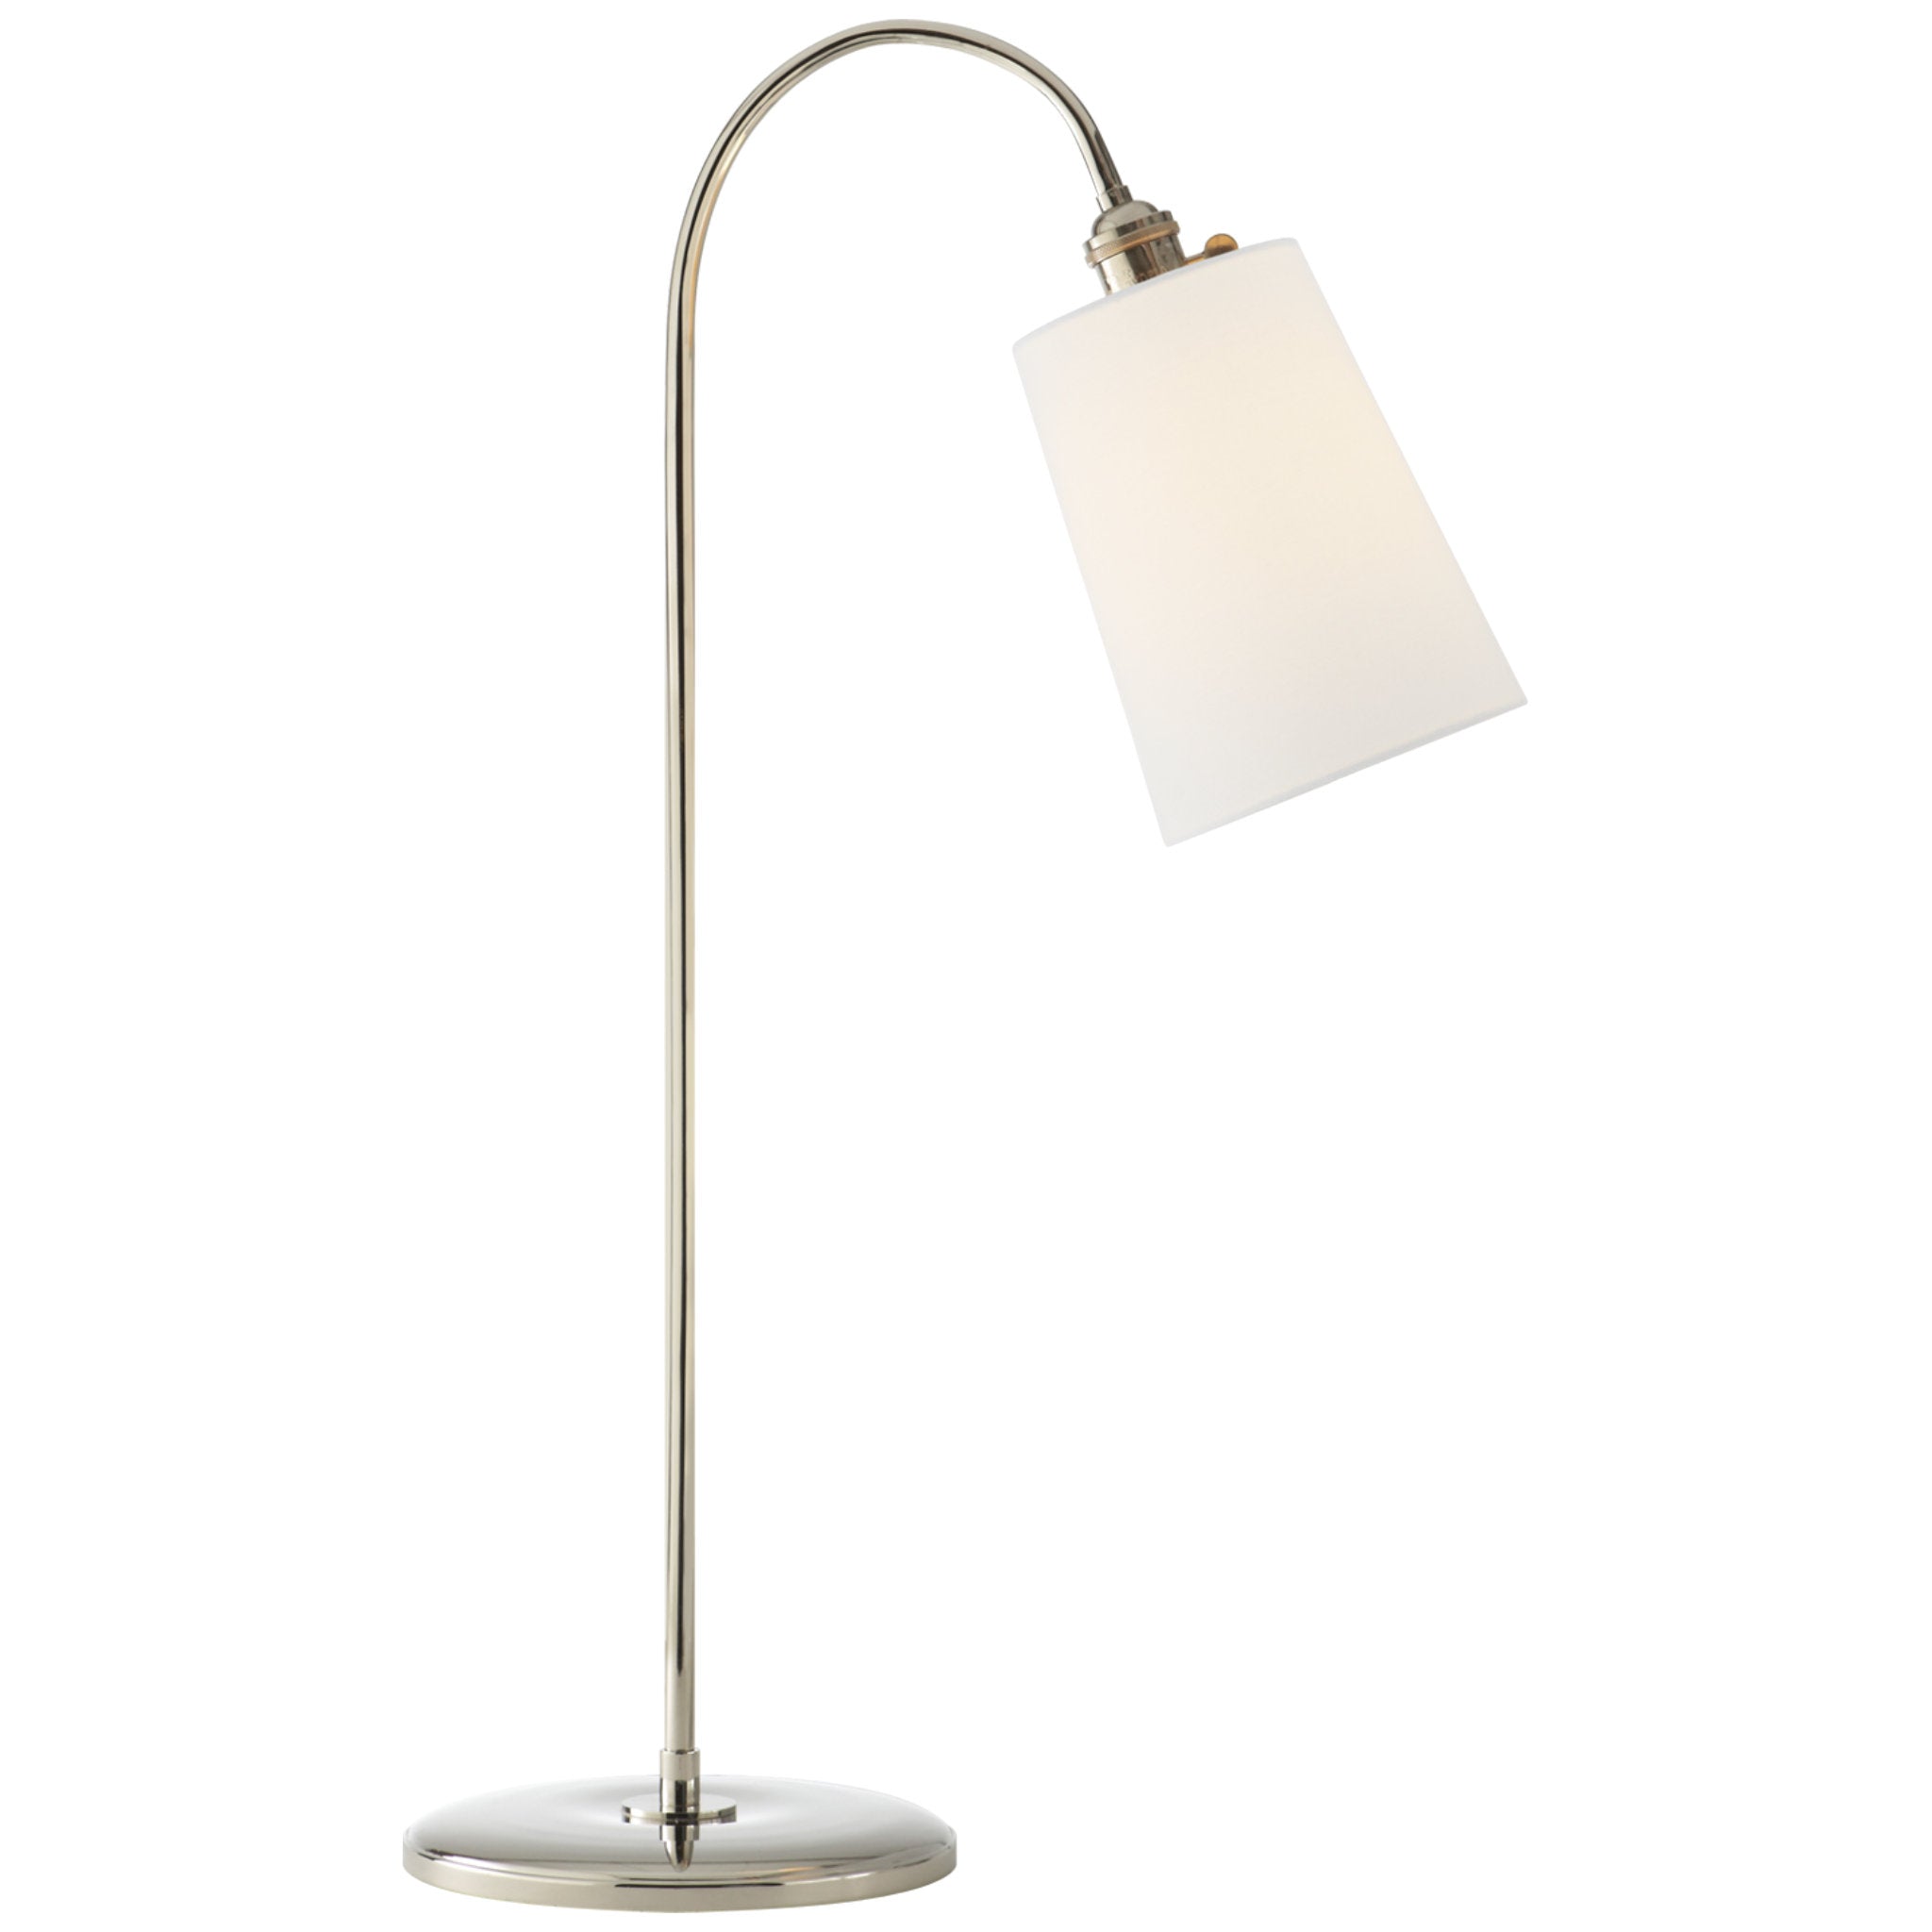 Thomas O'Brien Mia Table Lamp in Polished Nickel with Linen Shade